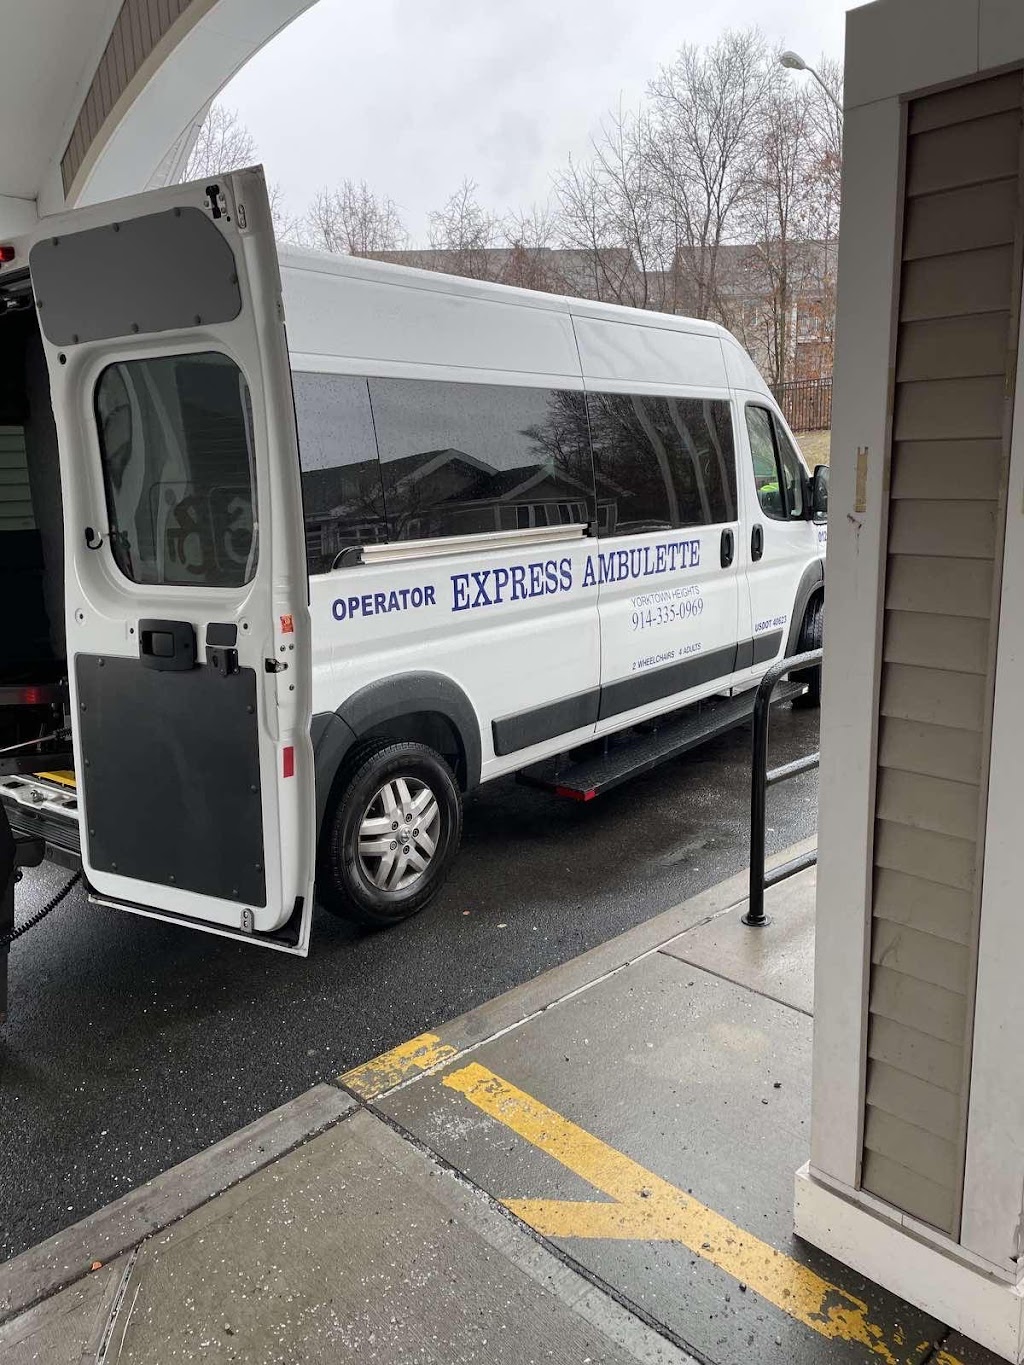 Express Ambulette | 2104 Crompond Rd, Yorktown Heights, NY 10598 | Phone: (914) 335-0969